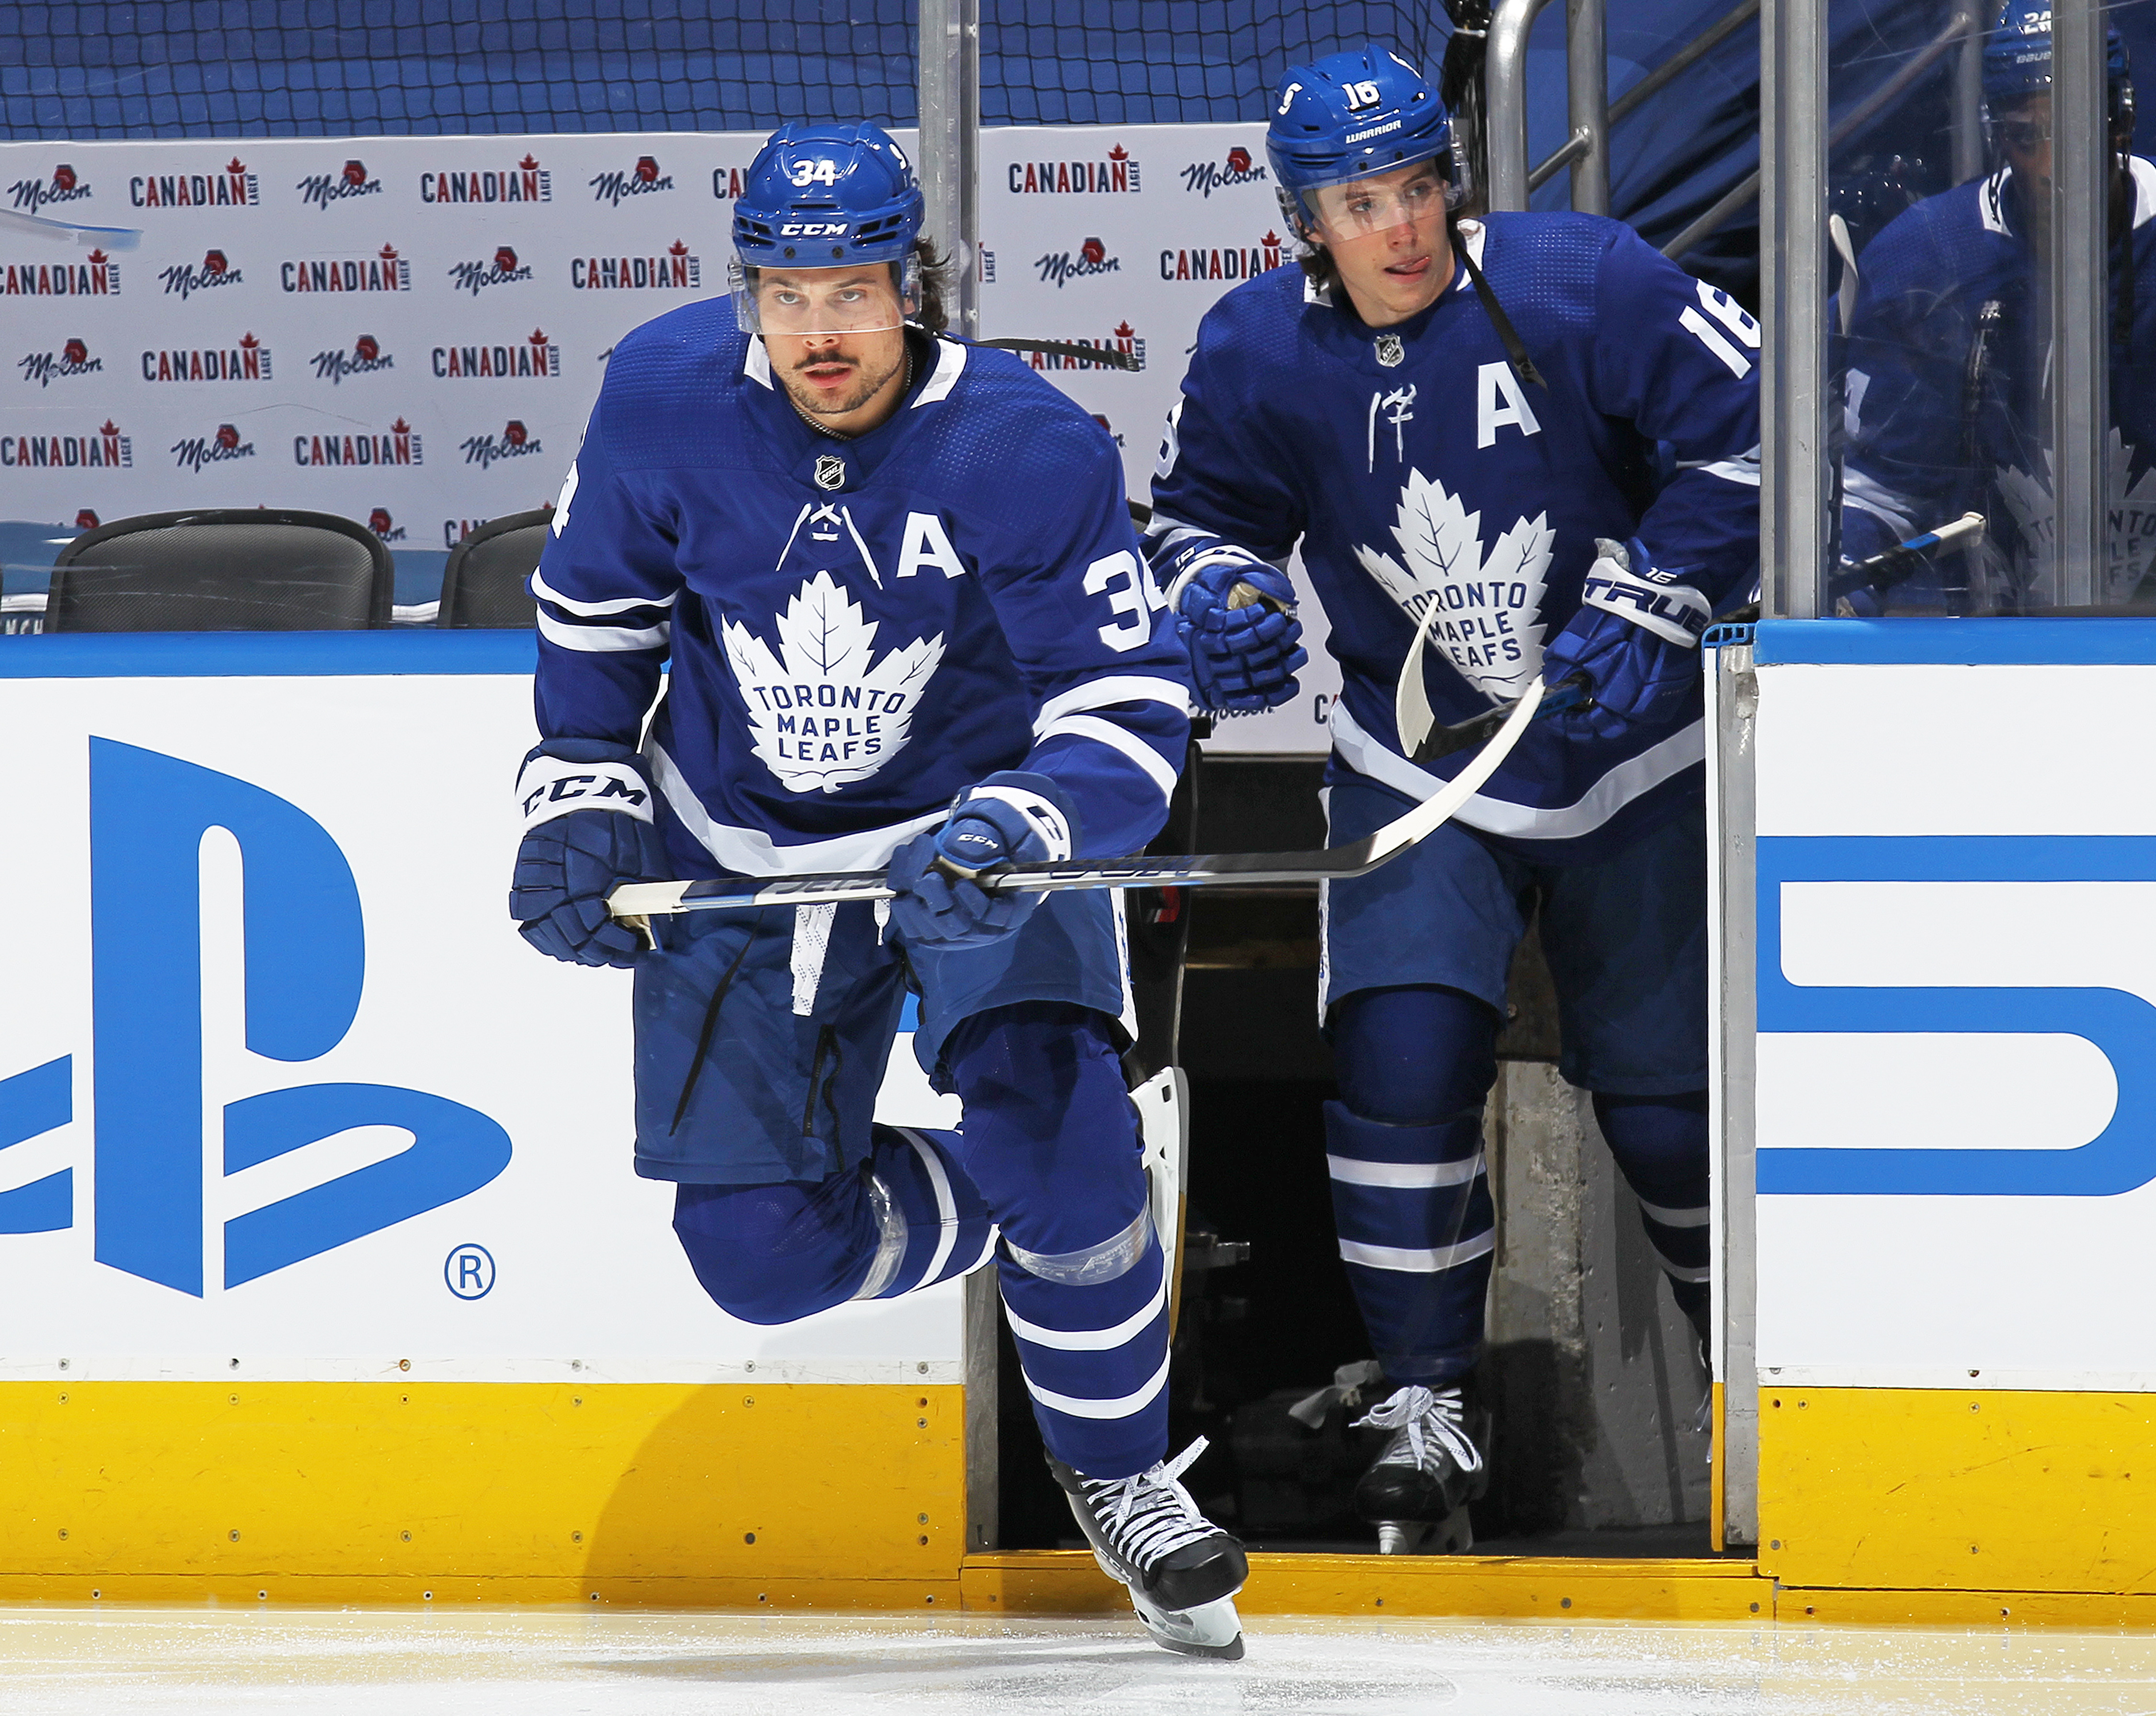 Auston Matthews #34 and Mitchell Marner #16 of the Toronto Maple Leafs take to the ice to play against the Montreal Canadiens in Game 7 of the First Round of the 2021 Stanley Cup Playoffs at Scotiabank Arena on May 31, 2021 in Toronto, Ontario, Canada.